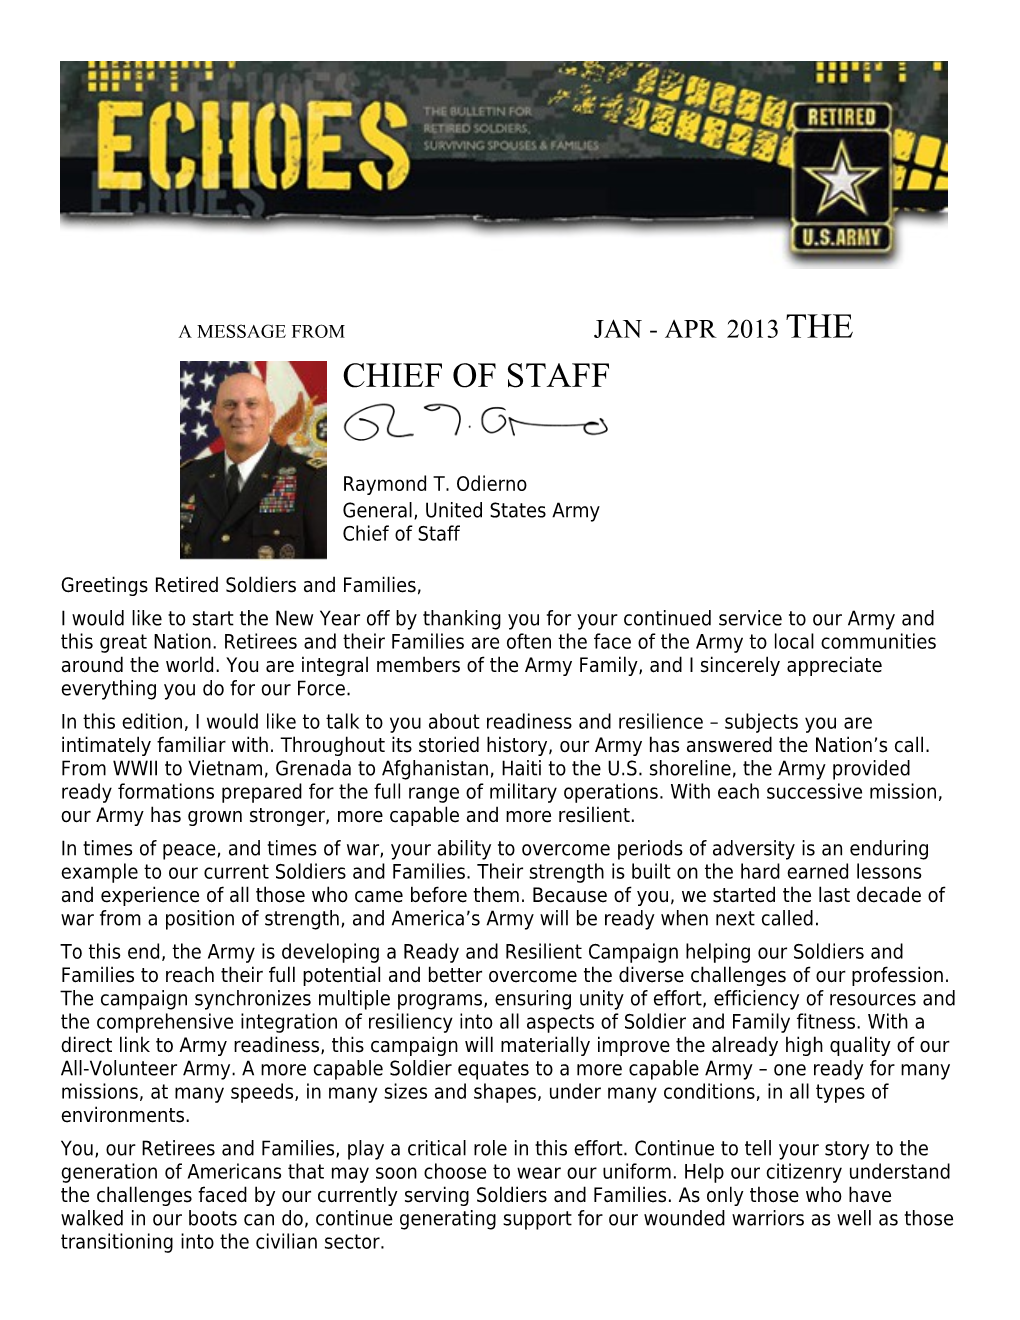 General, United States Army Chief of Staff